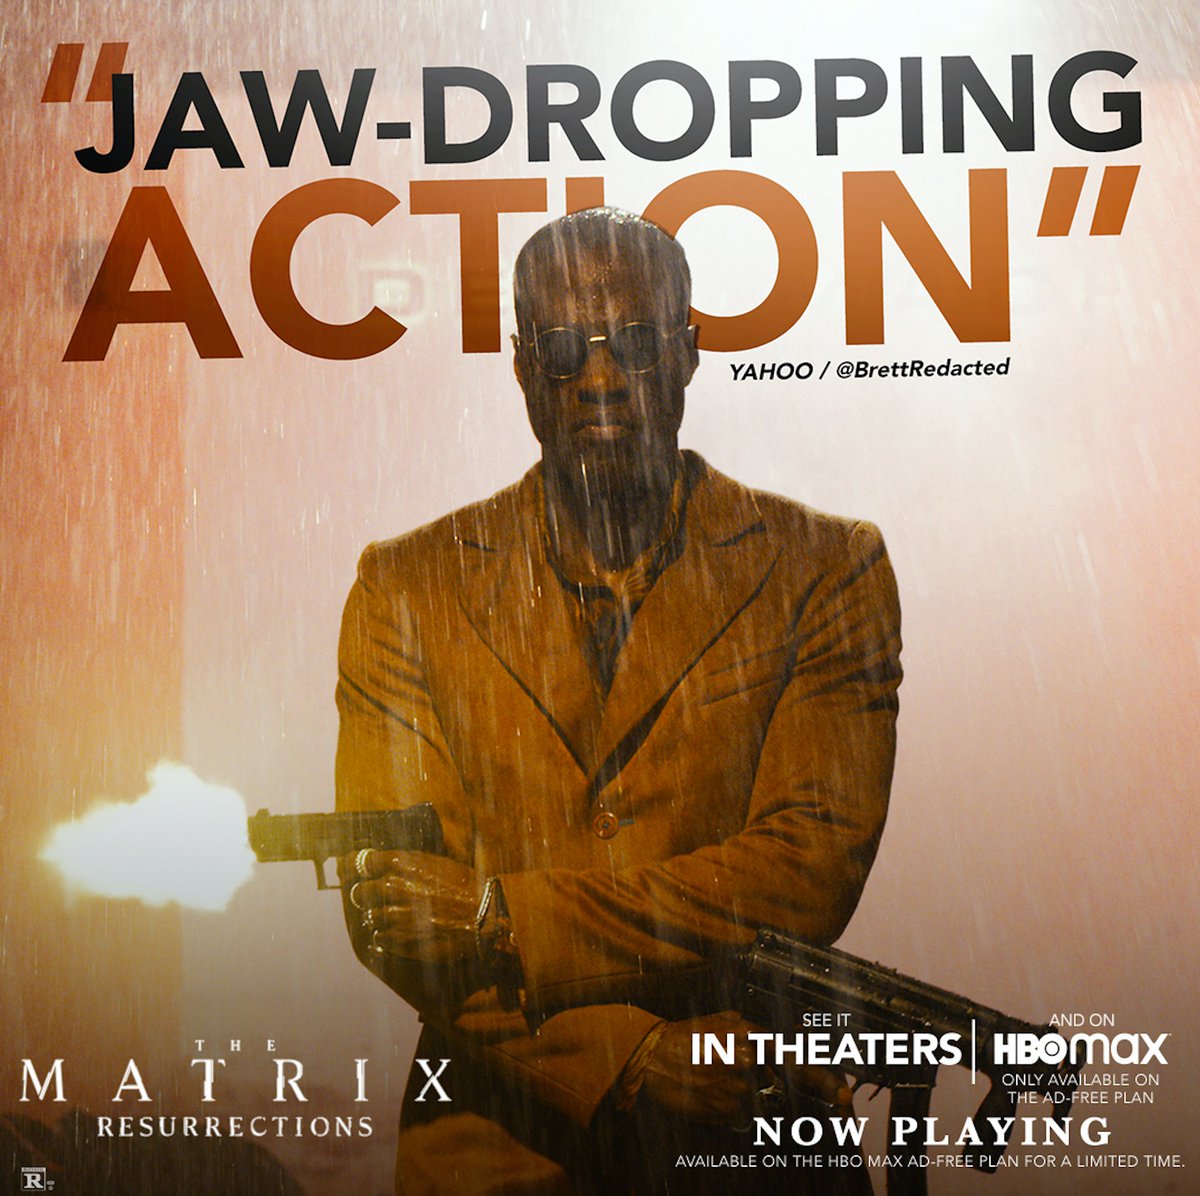 It wouldn't be a Matrix movie without jaw-dropping action. #TheMatrix Resurrections is now playing in theaters and on HBO Max. Get tickets: WhatIsTheMatrix.com